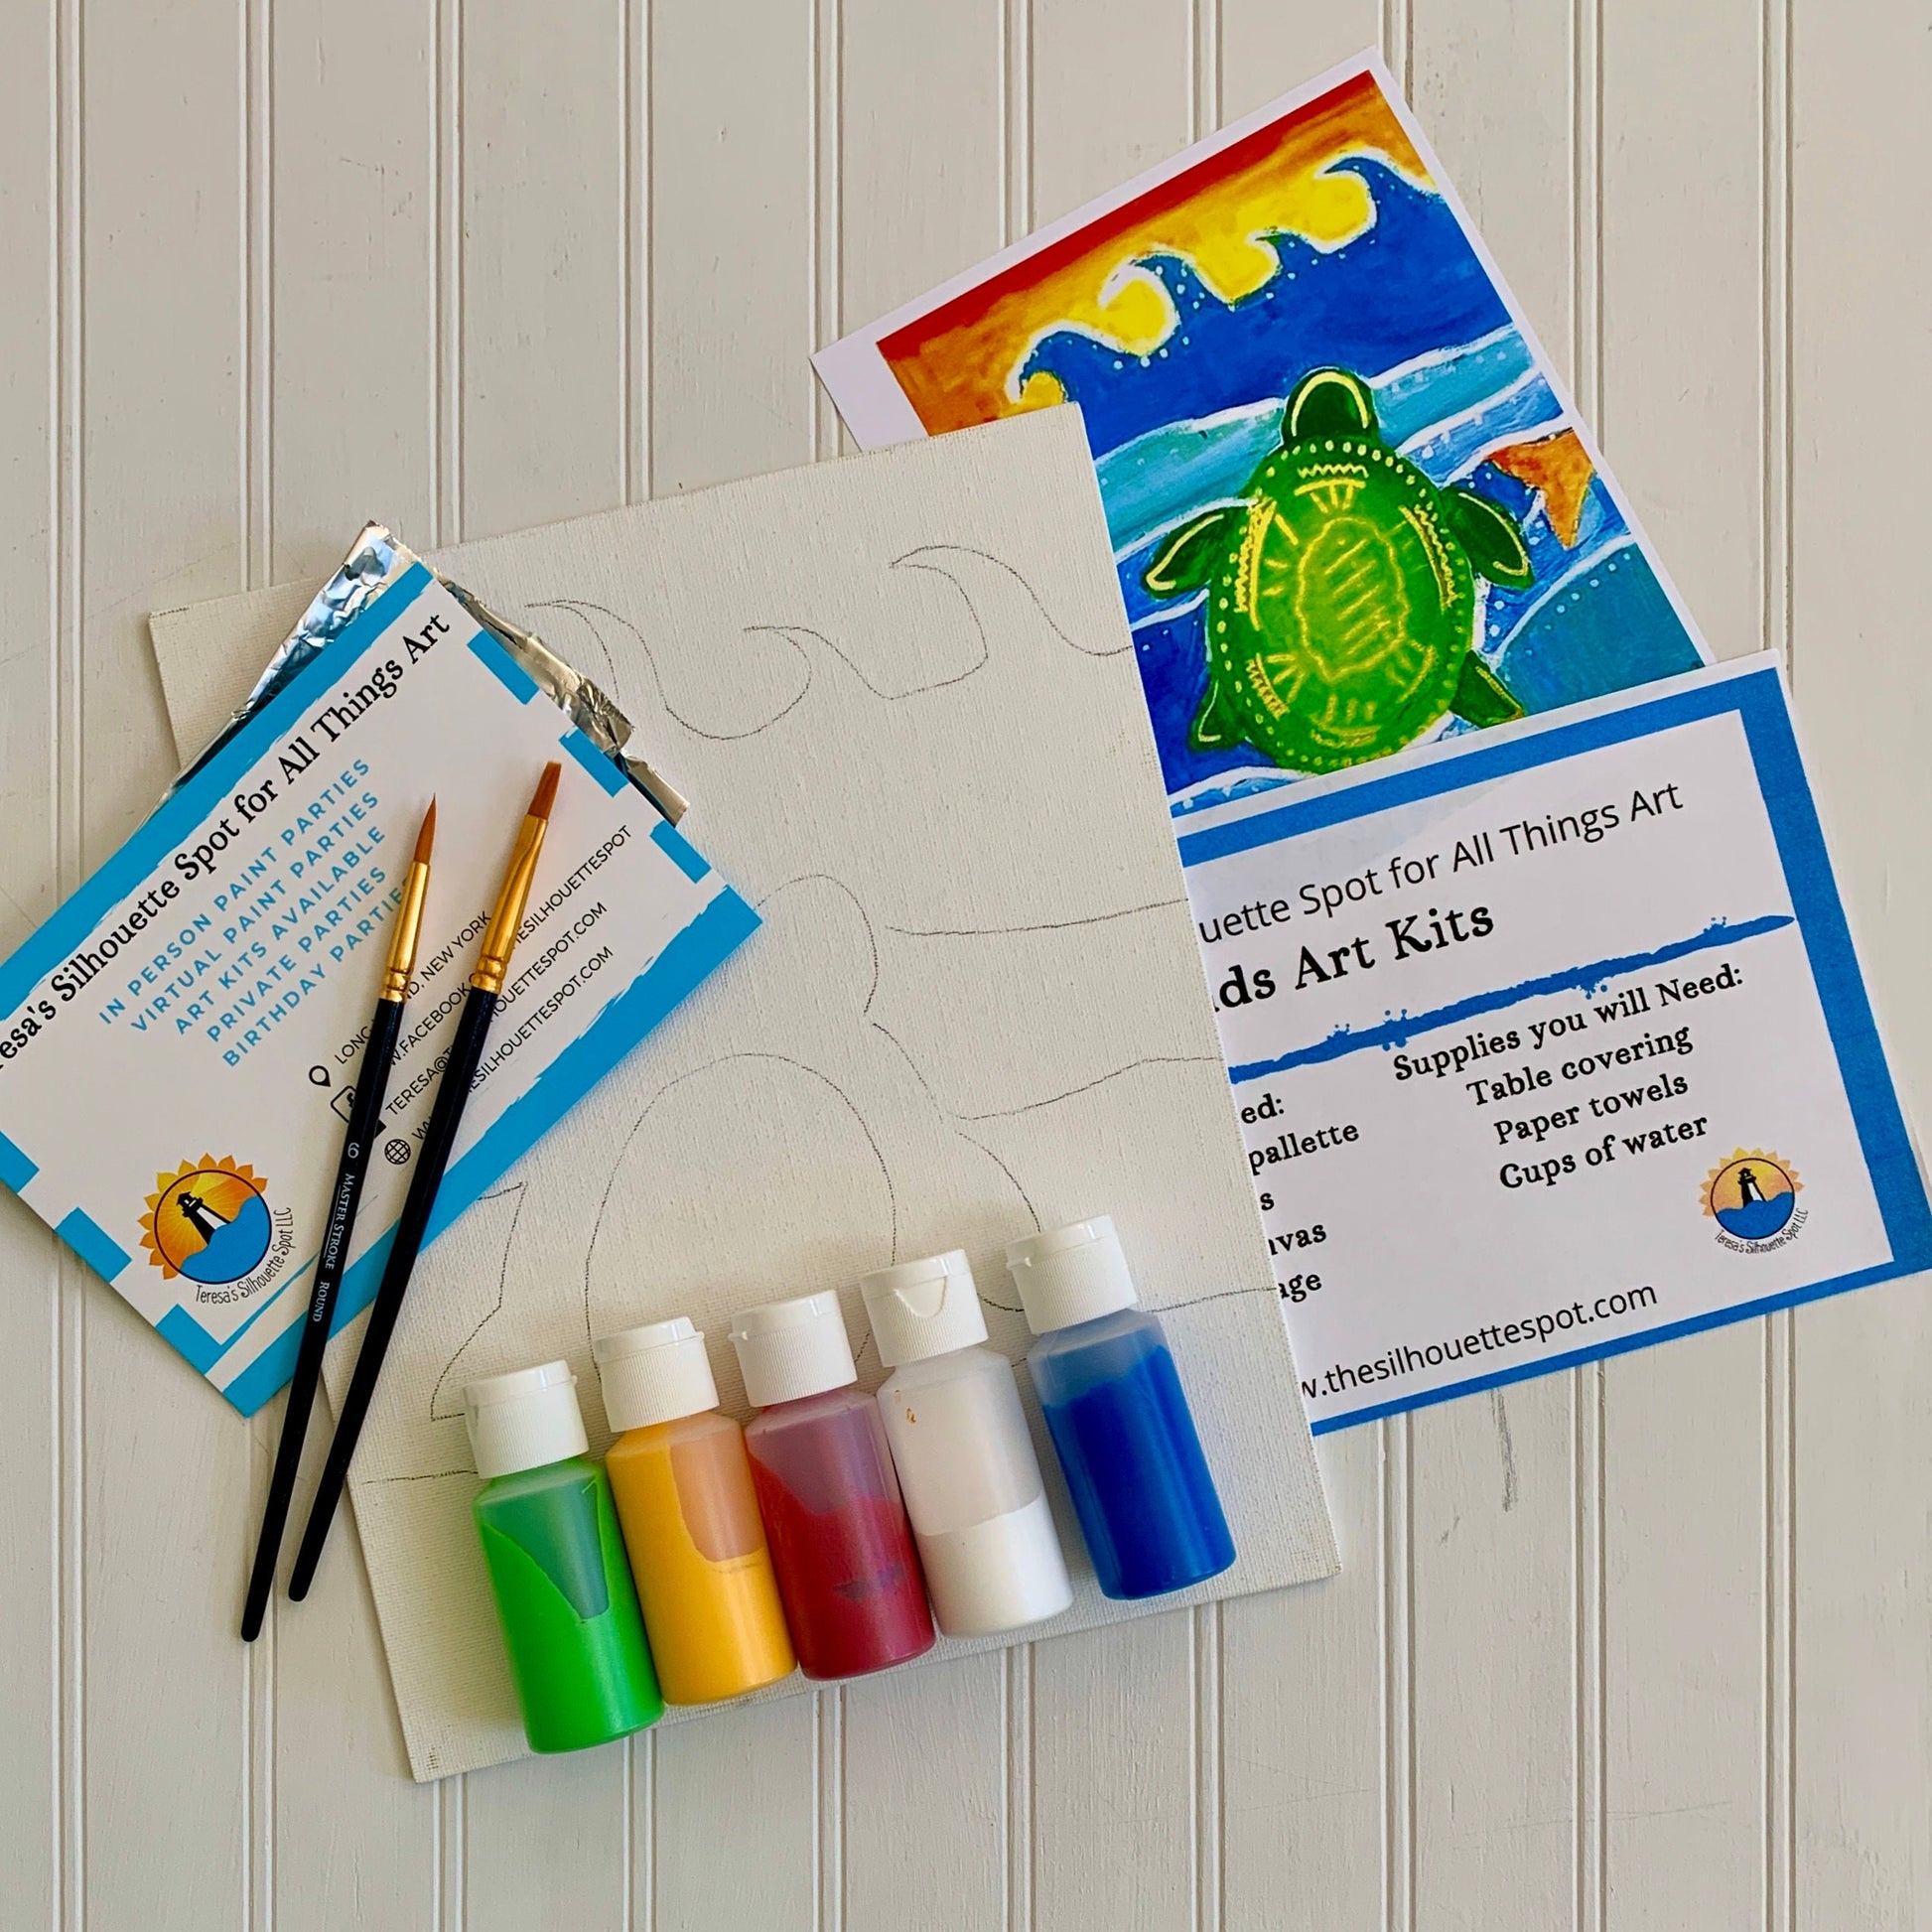  LEOGOR Multilayered Sea Turtle Art Kit - Painting Activities  for Girls Ages 8-12 and Boys - Ideal Wood Items for Kids to Paint on  Parties and Rainy Days : Toys & Games